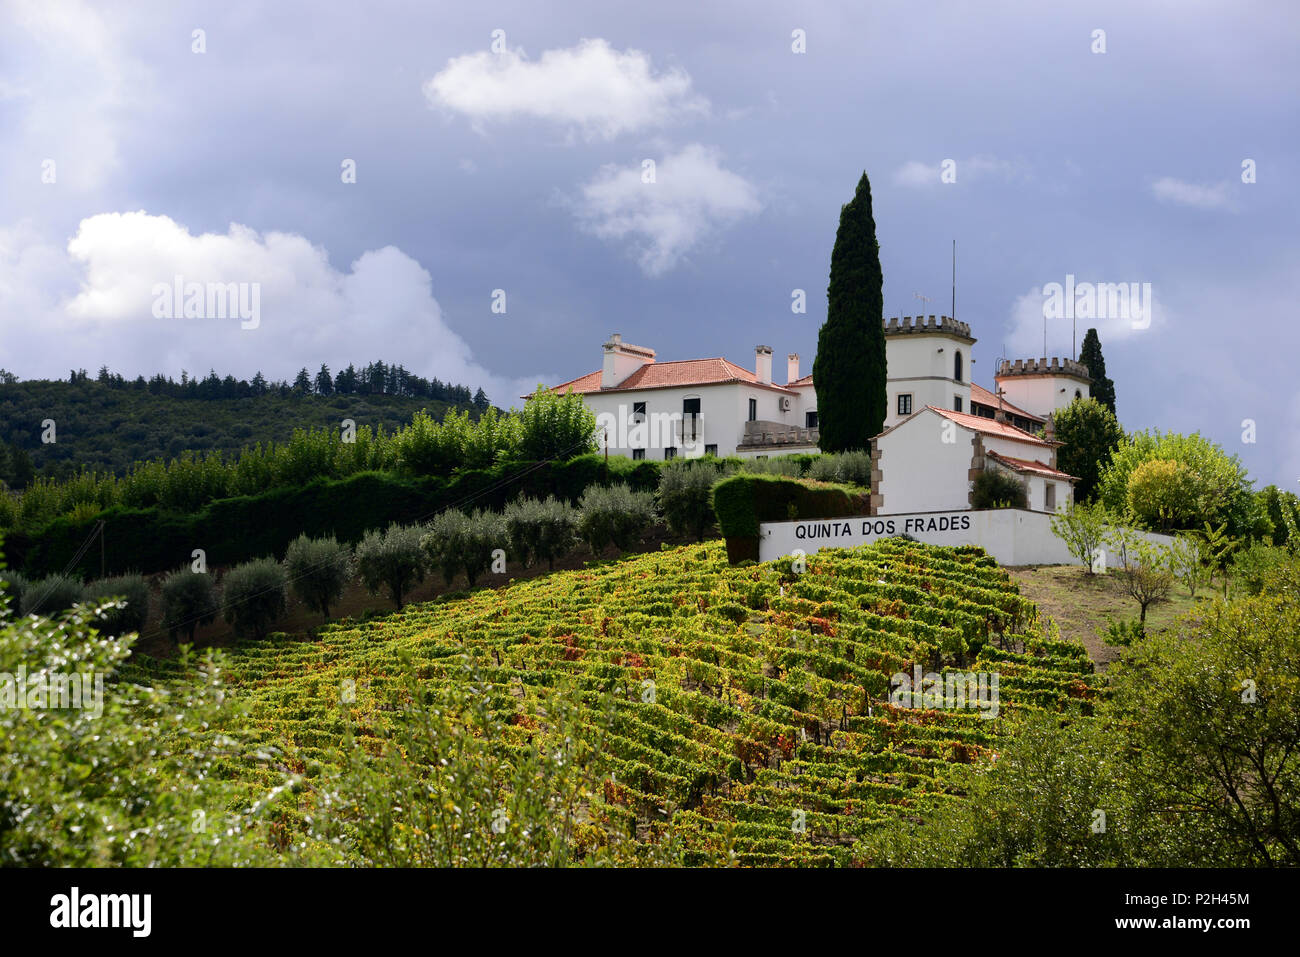 Vinery and winefields between Peso Regua and Pinhao, Douro valley, Norte, Portugal Stock Photo